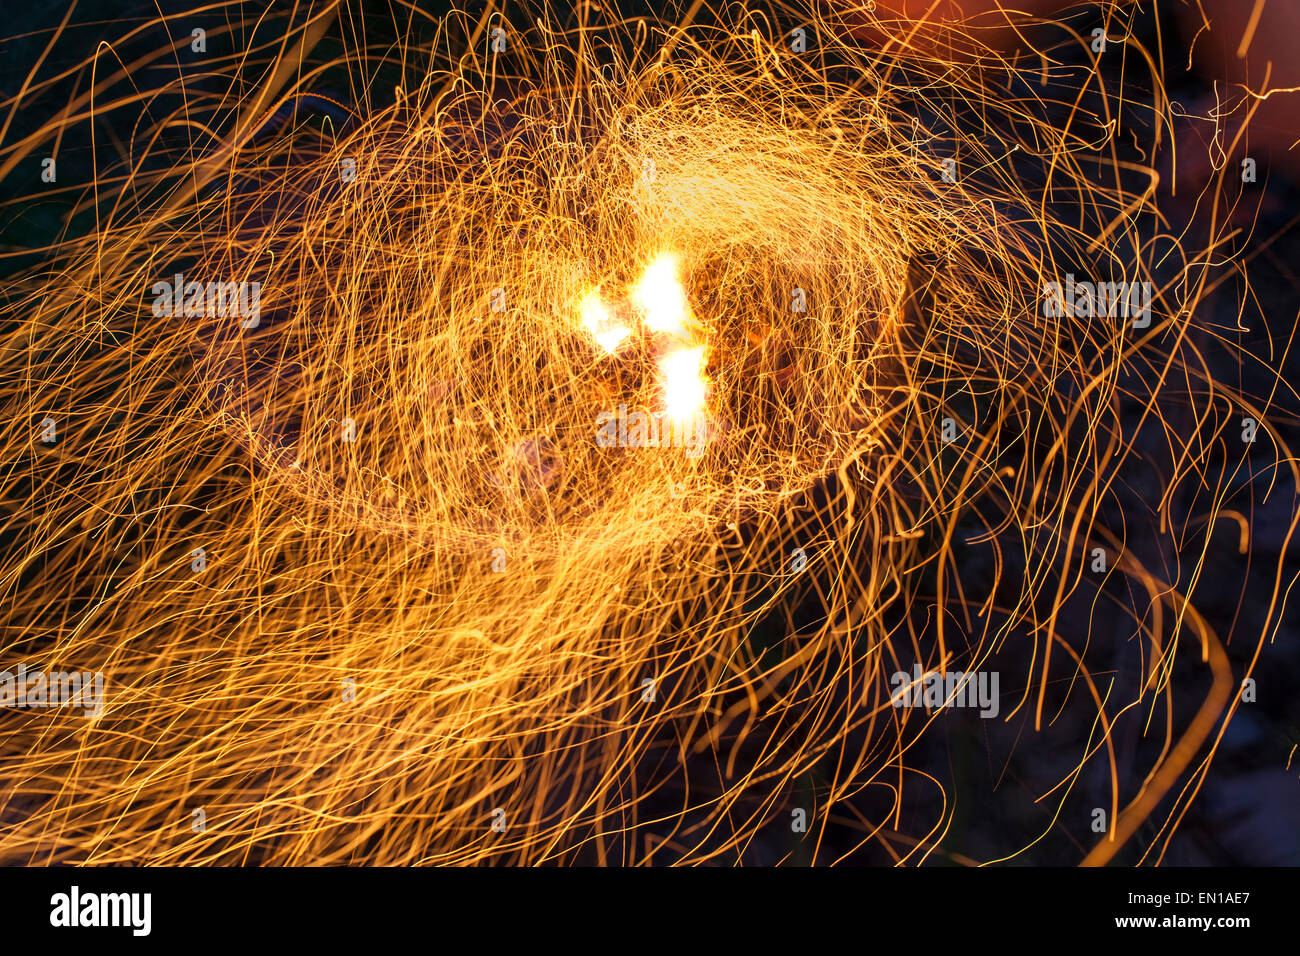 Long exposure of sparks flying off a barbecue fire. Stock Photo